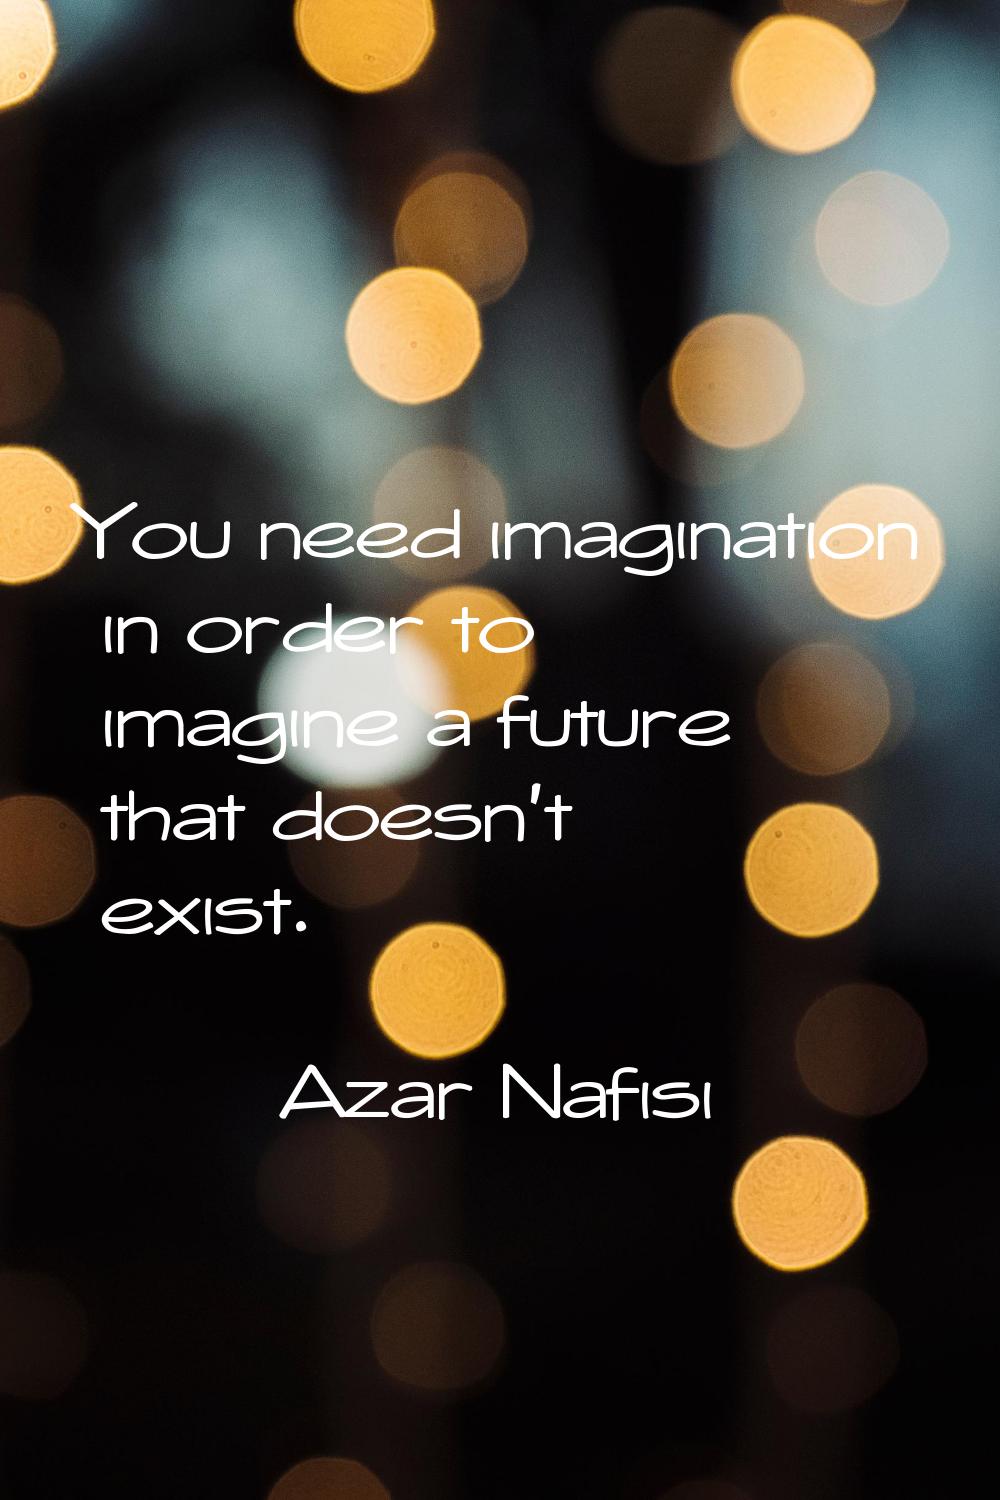 You need imagination in order to imagine a future that doesn't exist.